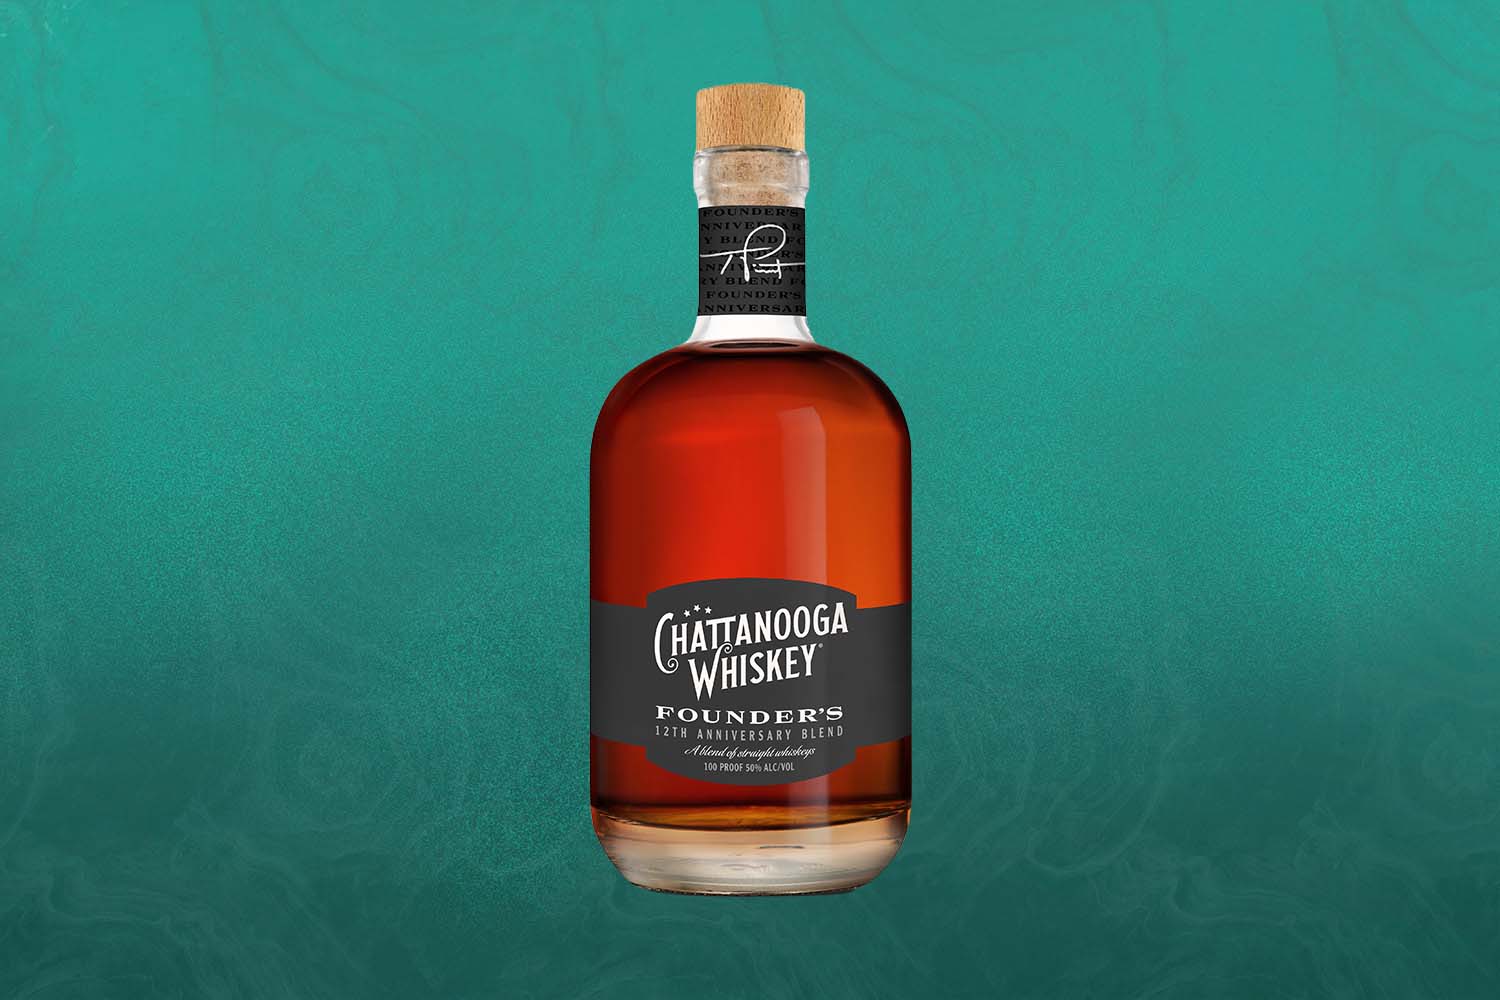 Chattanooga Whiskey Founder’s 12th Anniversary